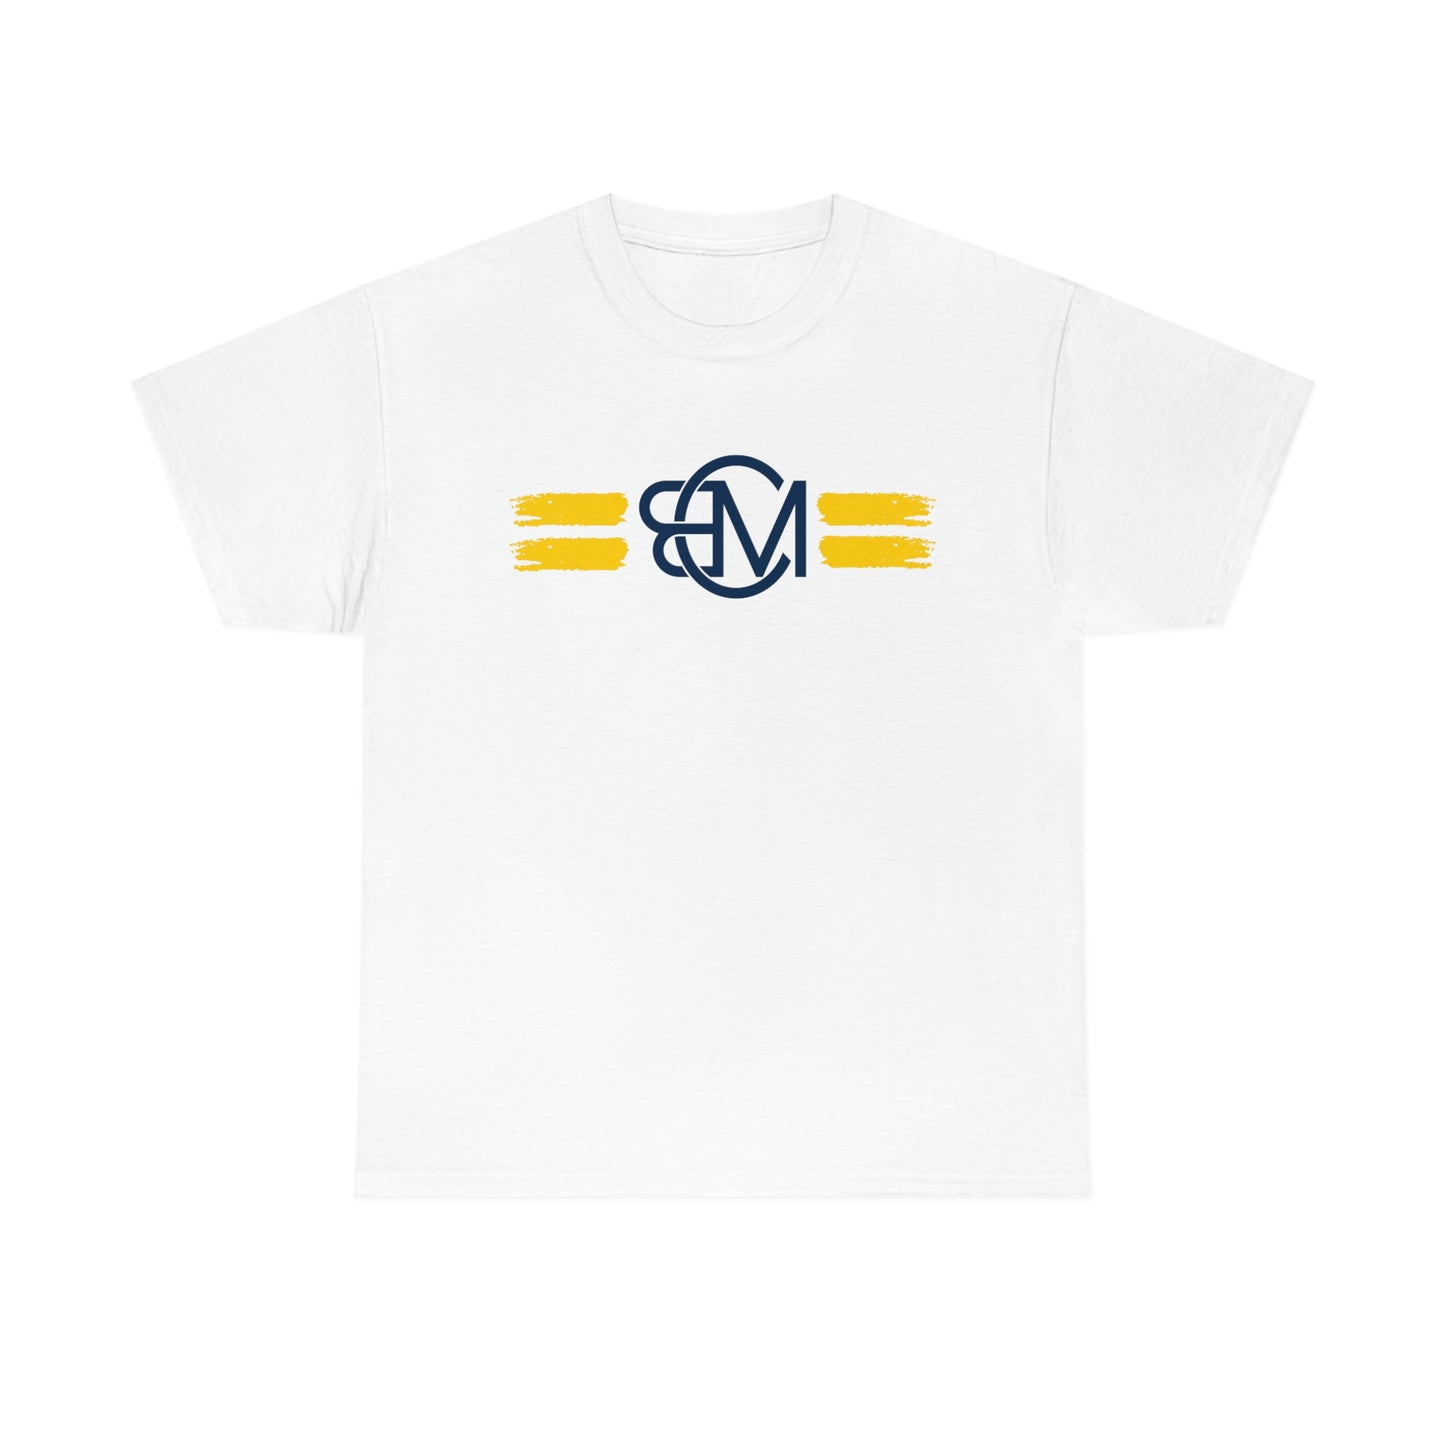 Caydan Bell-Mckethan Team Colors Tee